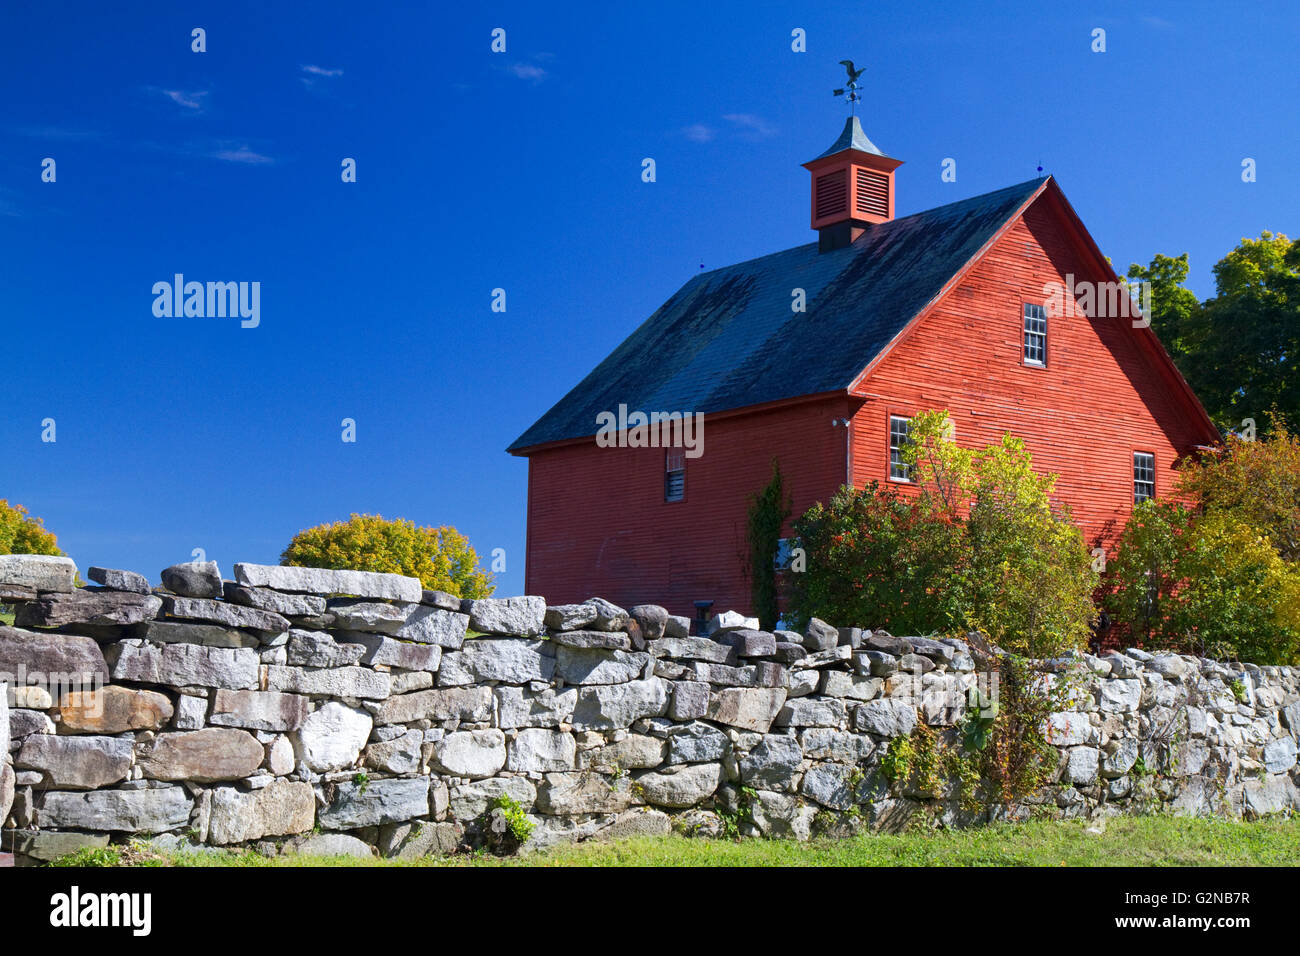 Red barn in the countryside near Keene, New Hampshire, USA. Stock Photo